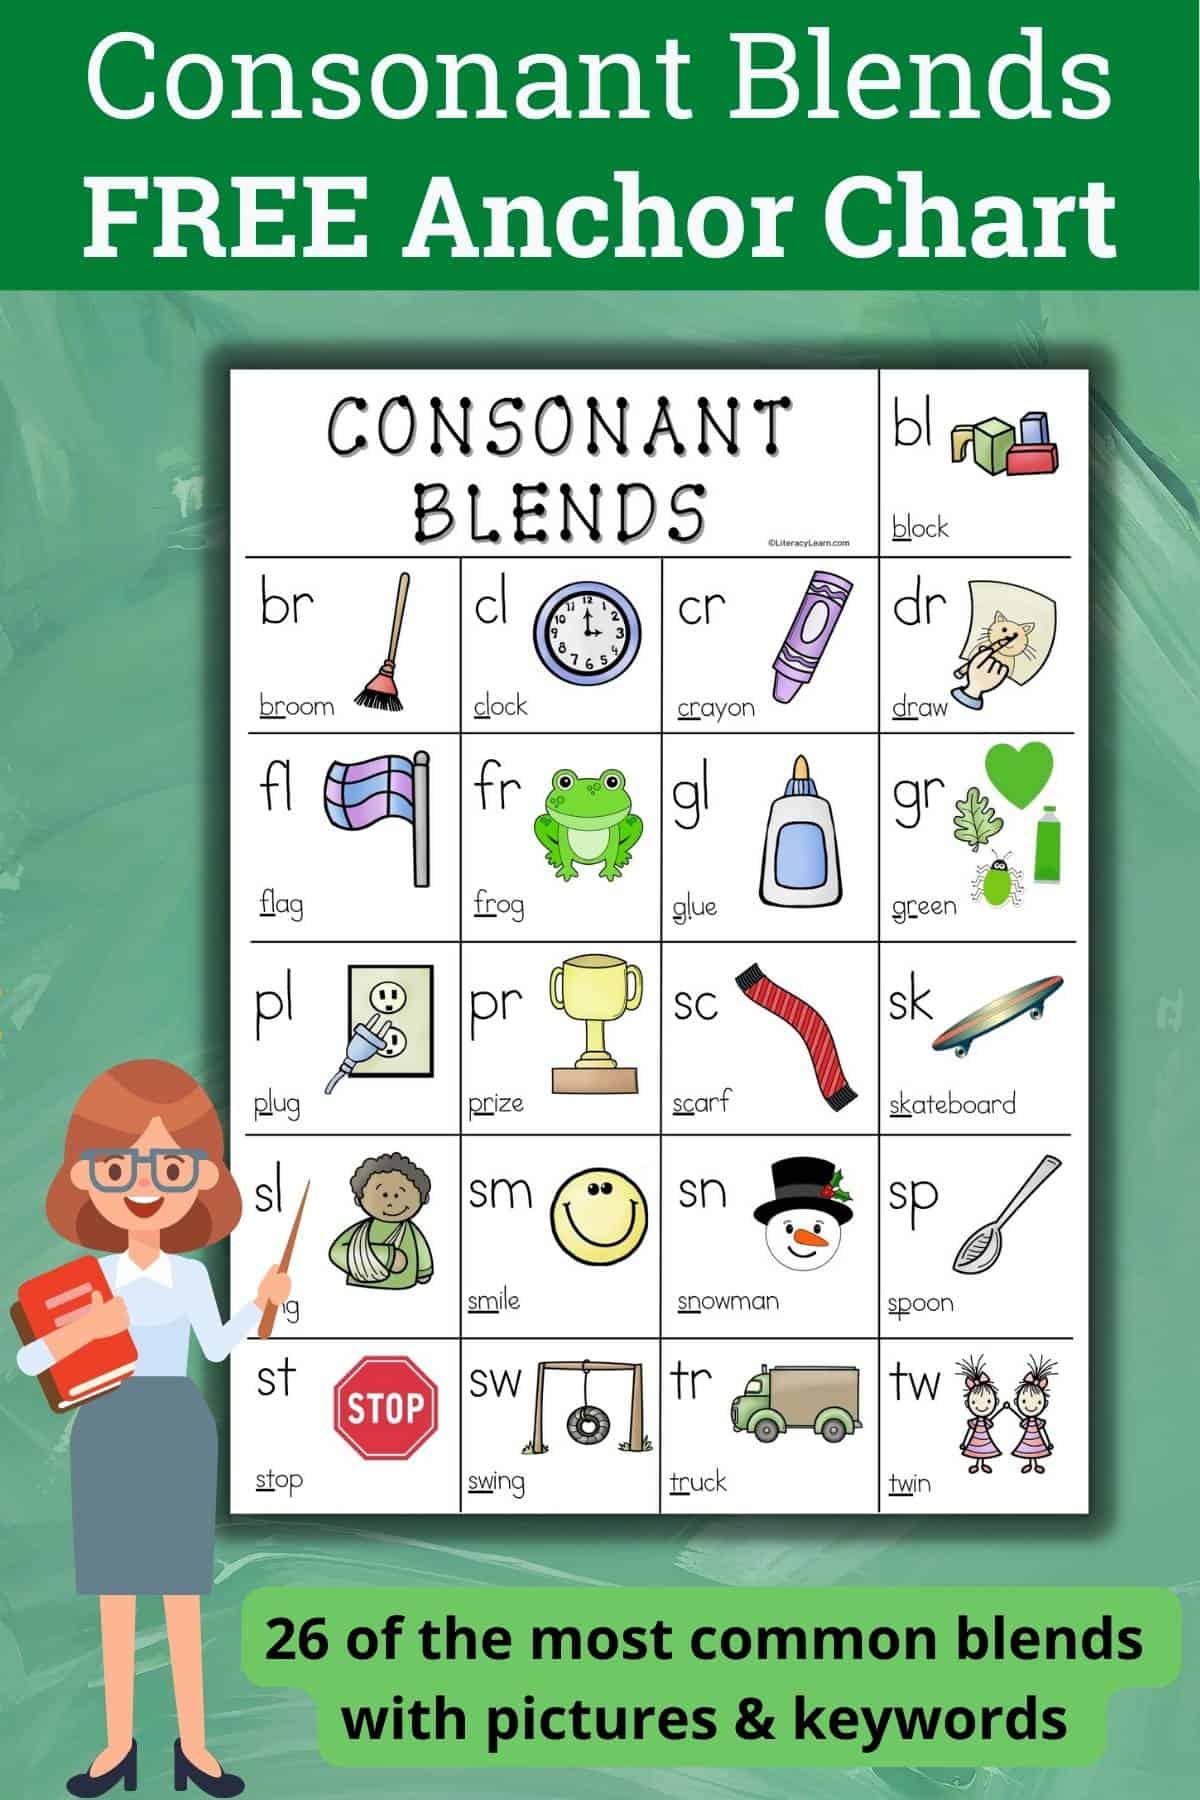 Consonant Blends Anchor Chart graphic with a cartoon teacher pointing to the poster.